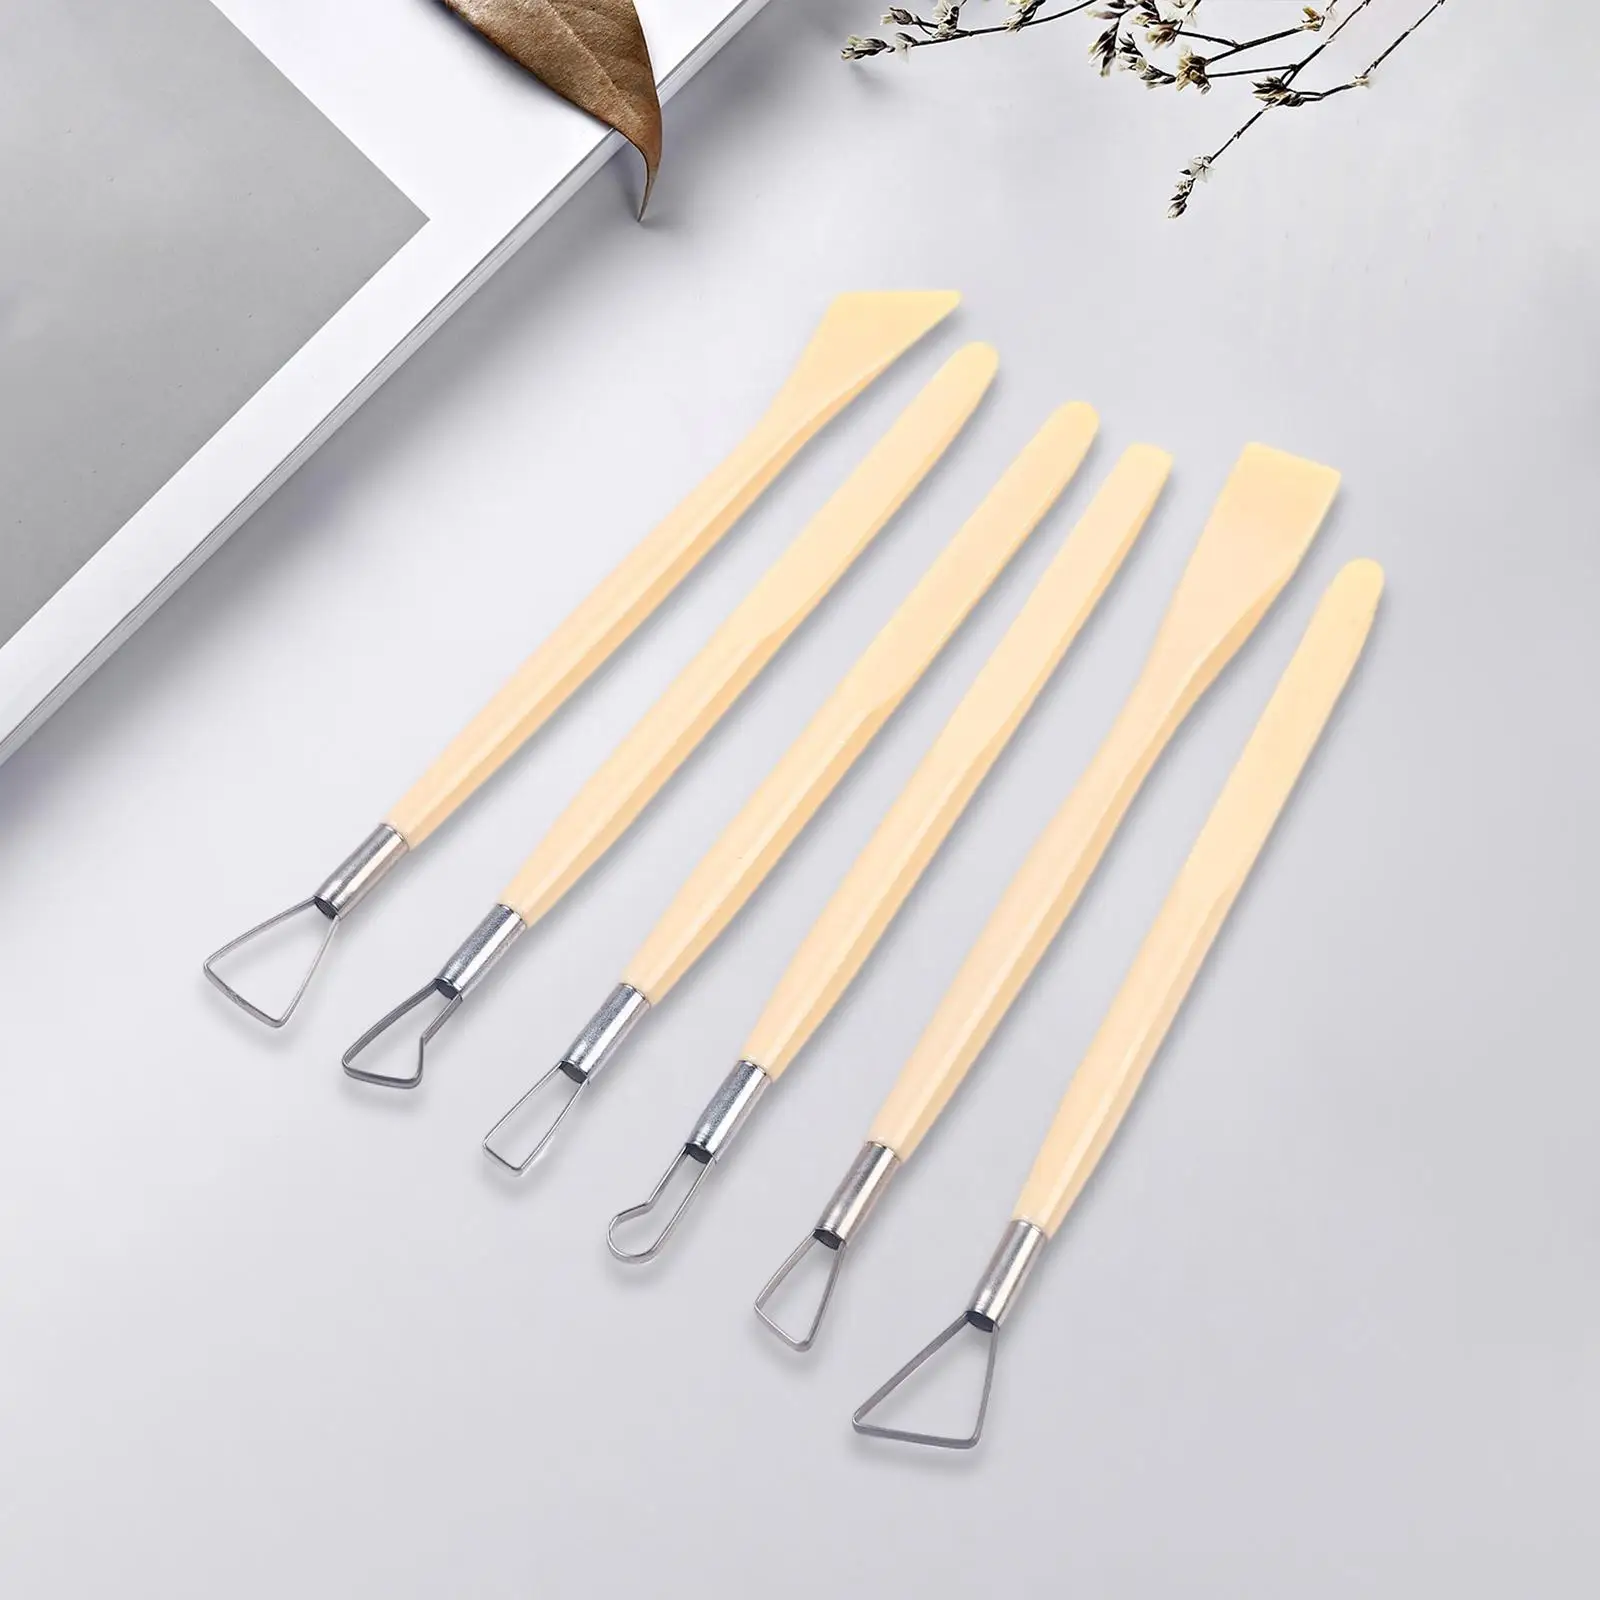 6 Pieces Ceramic Pottery Clay Tools Double Head Durable Accessory Multifunctional with Different Tips for Detailing and Trimming